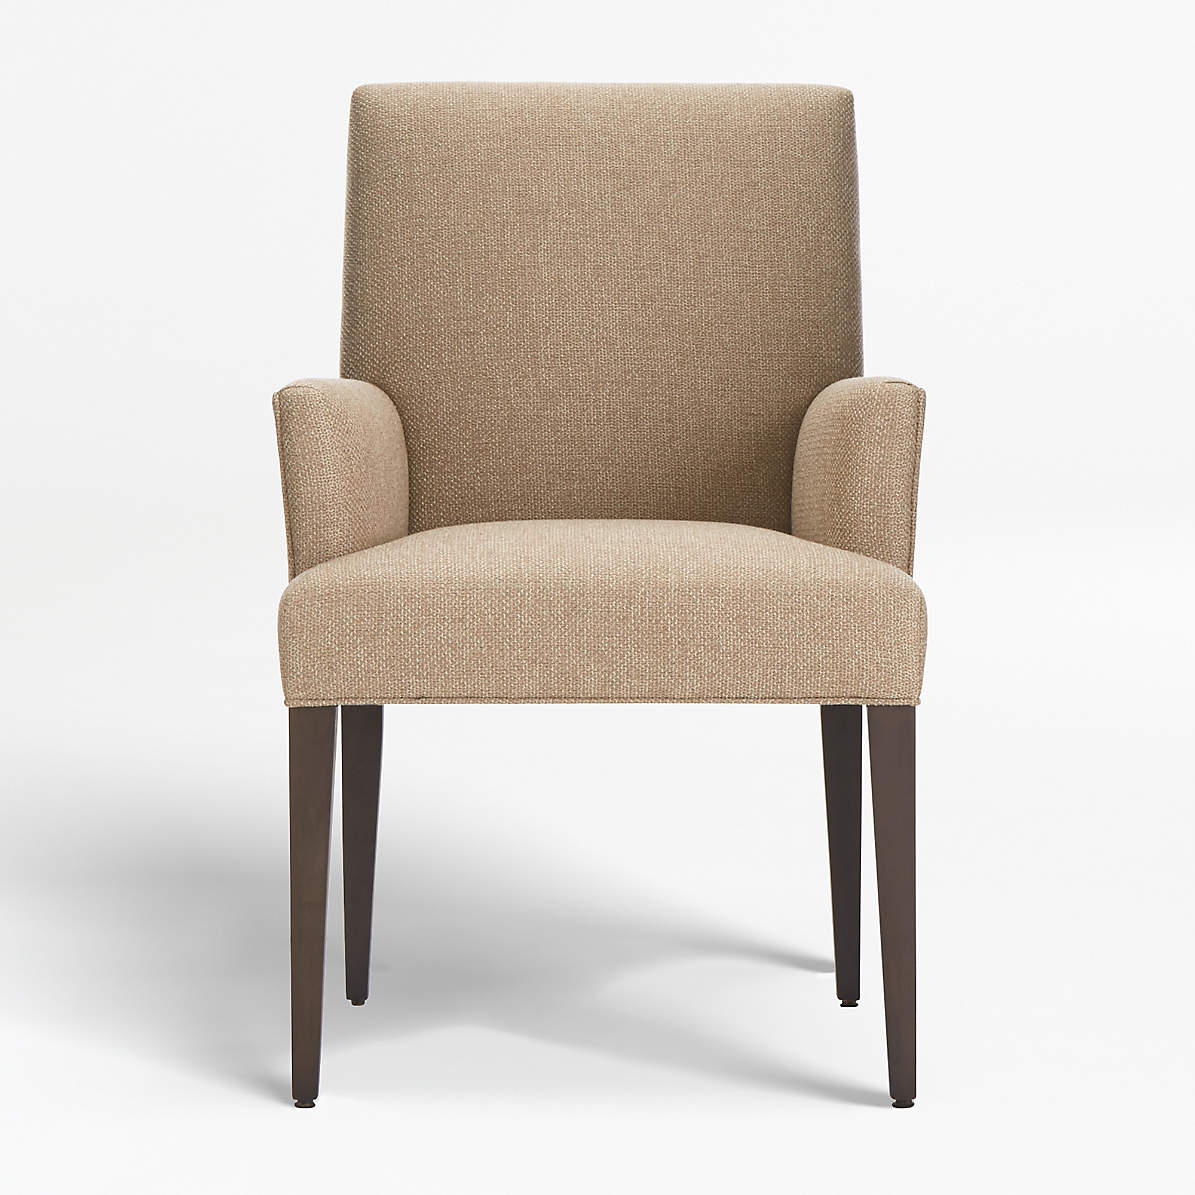 Upholstered Dining Arm Chair Reviews Crate And Barrel